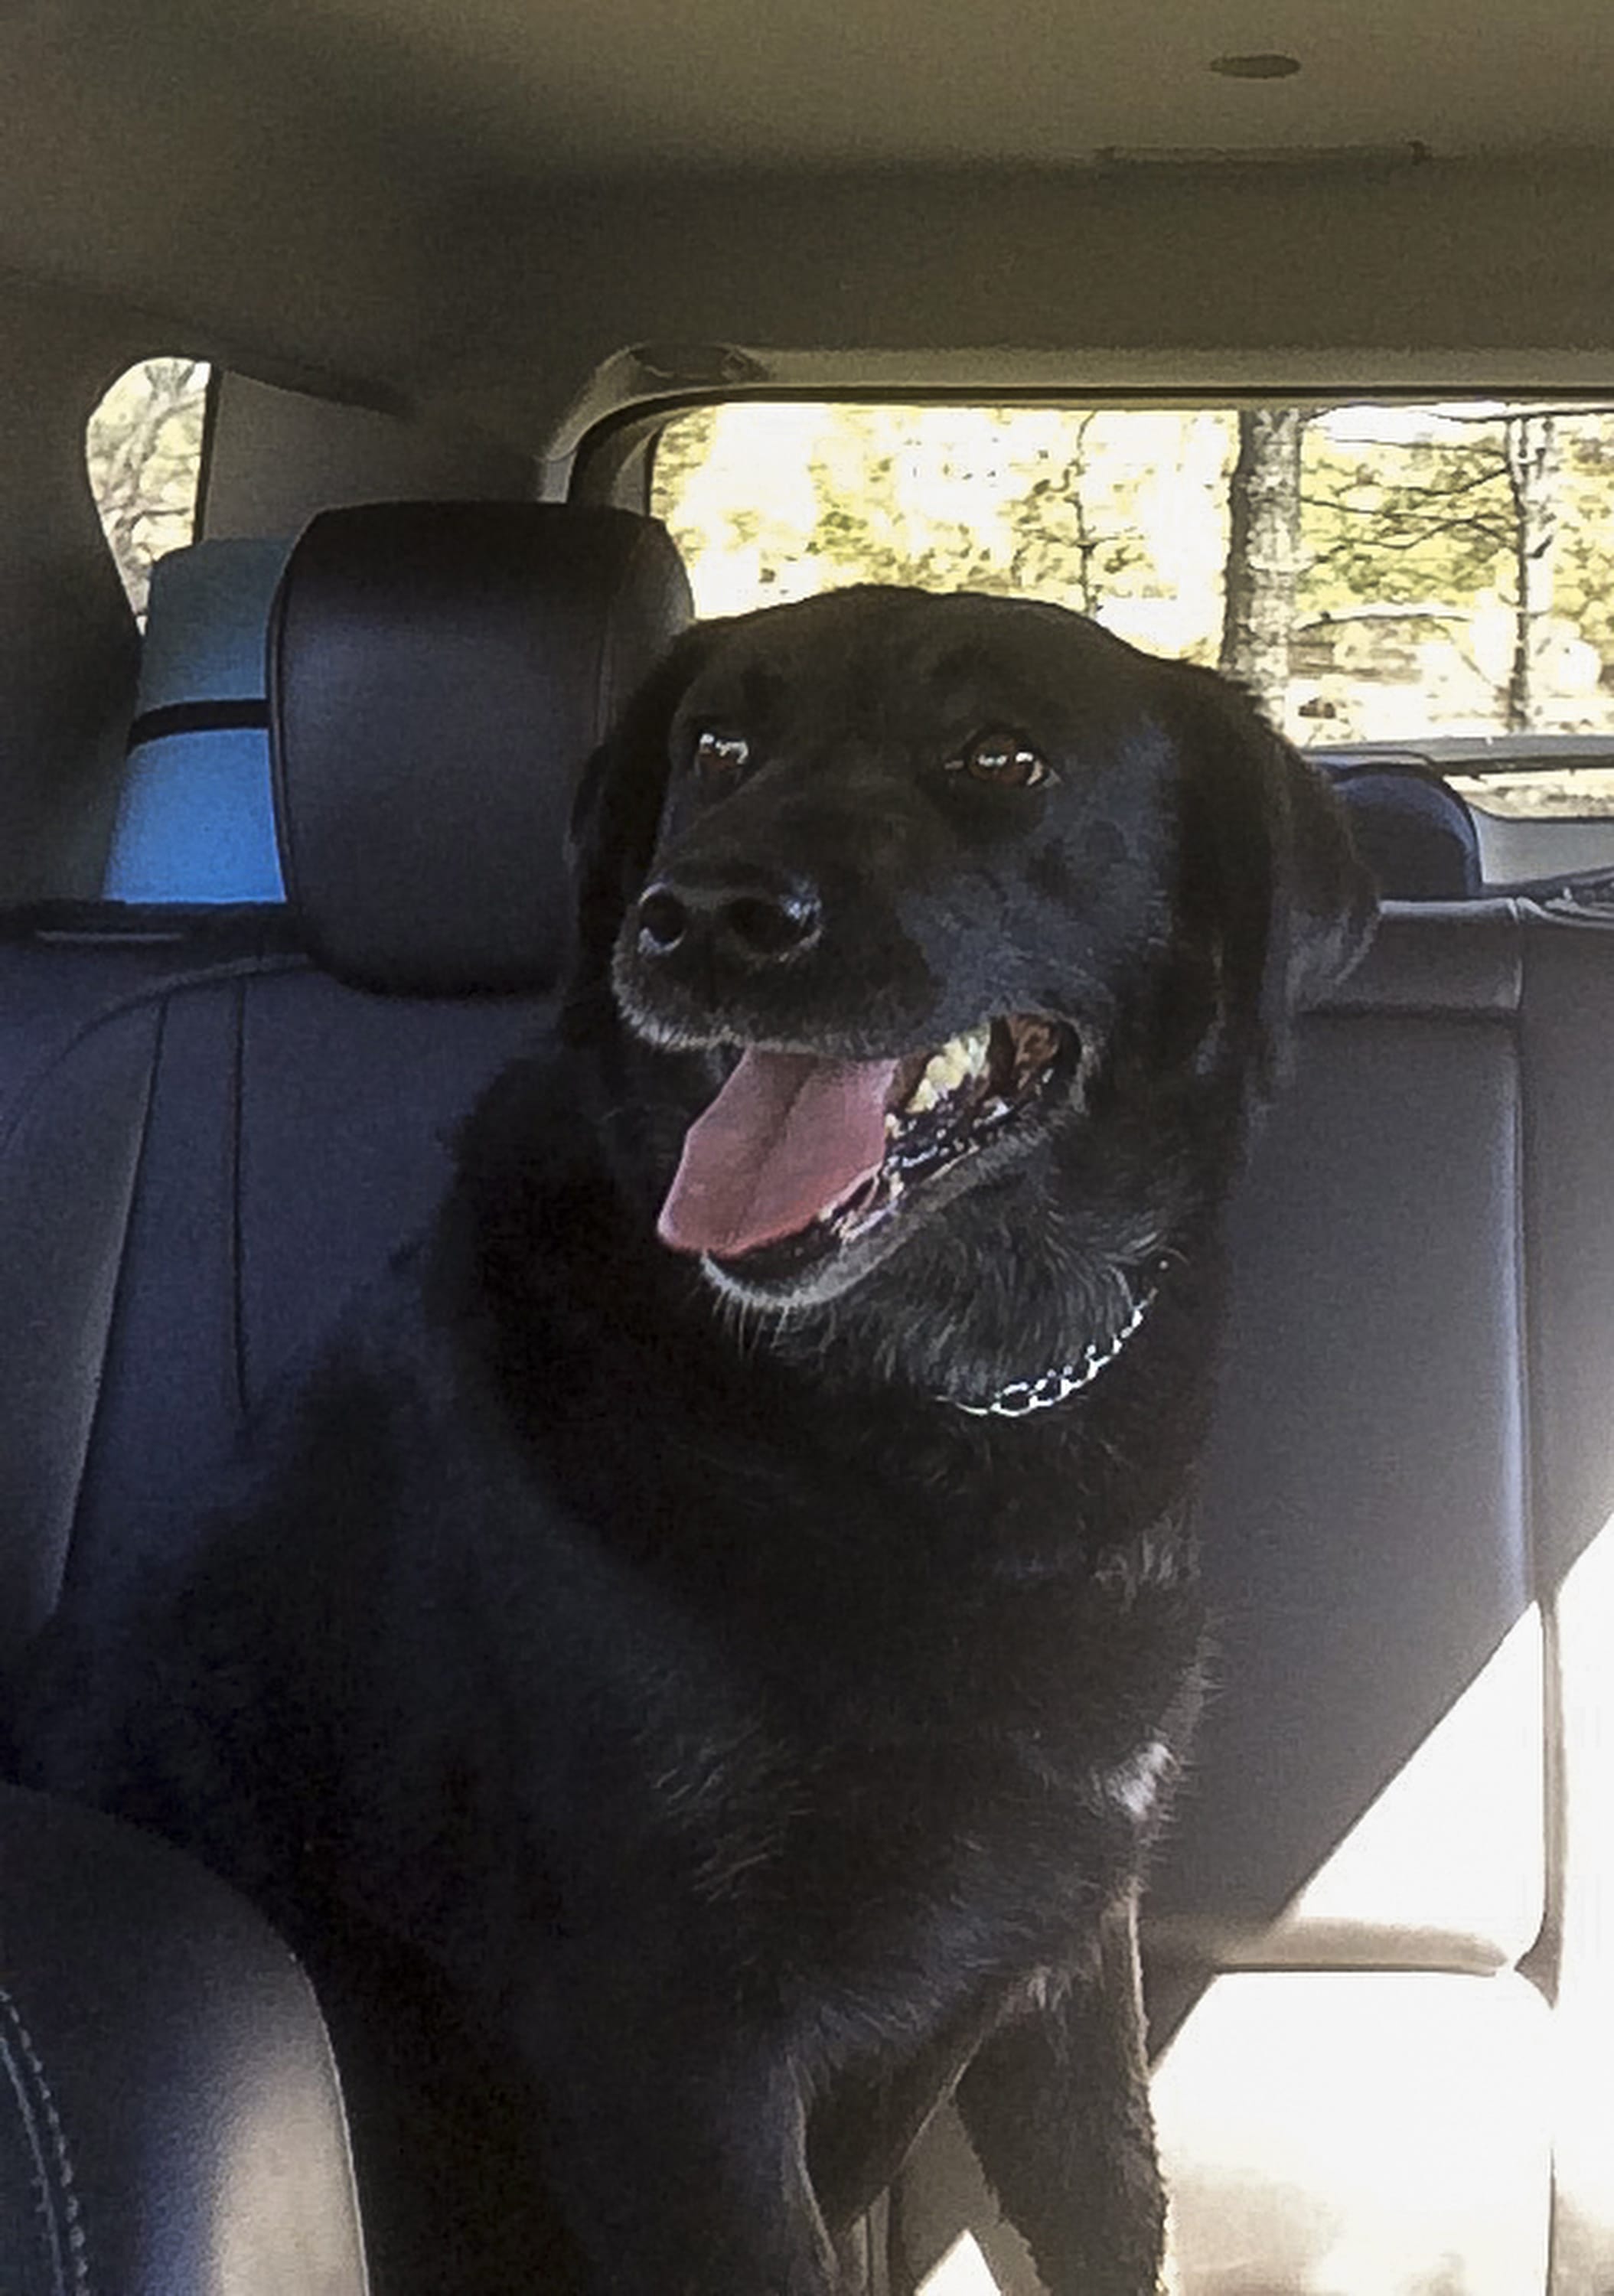 Thumper, a 70-pound lab, sits in the backseat of Associated Press reporter Brian Skoloff's rental car, as he drove it back to town to get reunited with her owner, resident Lawrence Ross. Skoloff retrieved Thumper as it crawled out from beneath a house covered in ash and soot in a wildfire evacuation zone near Middletown, Calif. Officials had not let residents return to the area since the fire had erupted about 100 miles north of San Francisco, scorching thousands of acres and reducing more than 800 homes to ash. Thumper survived among homes burned to their foundations and the five days she had been alone at the house that miraculously remained unscathed.